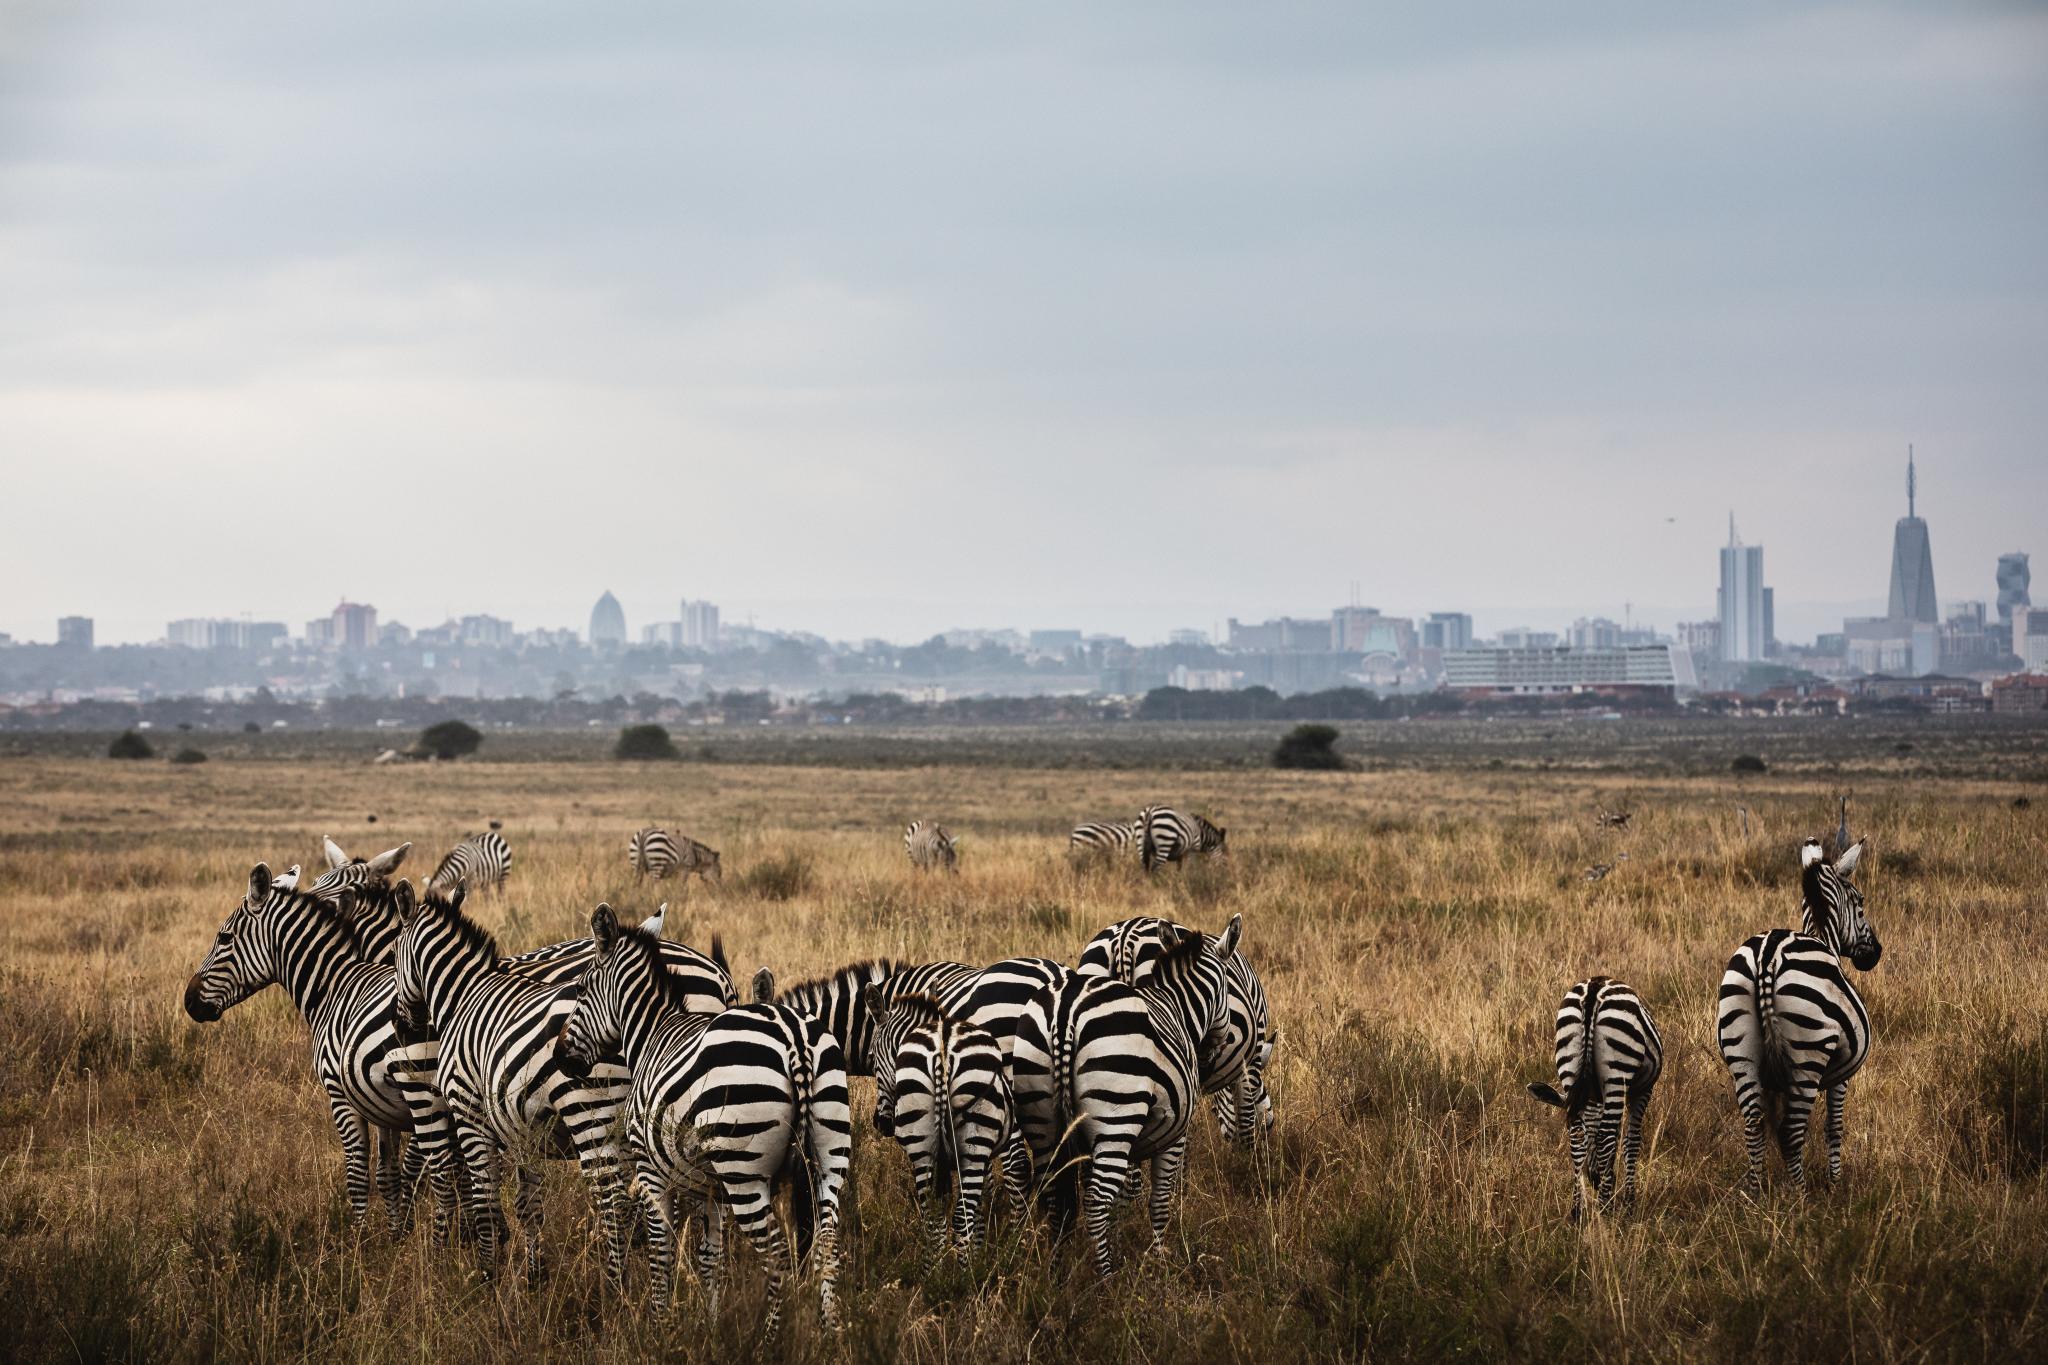 Image of Nairobi National Park in the foreground with city skyline in the background